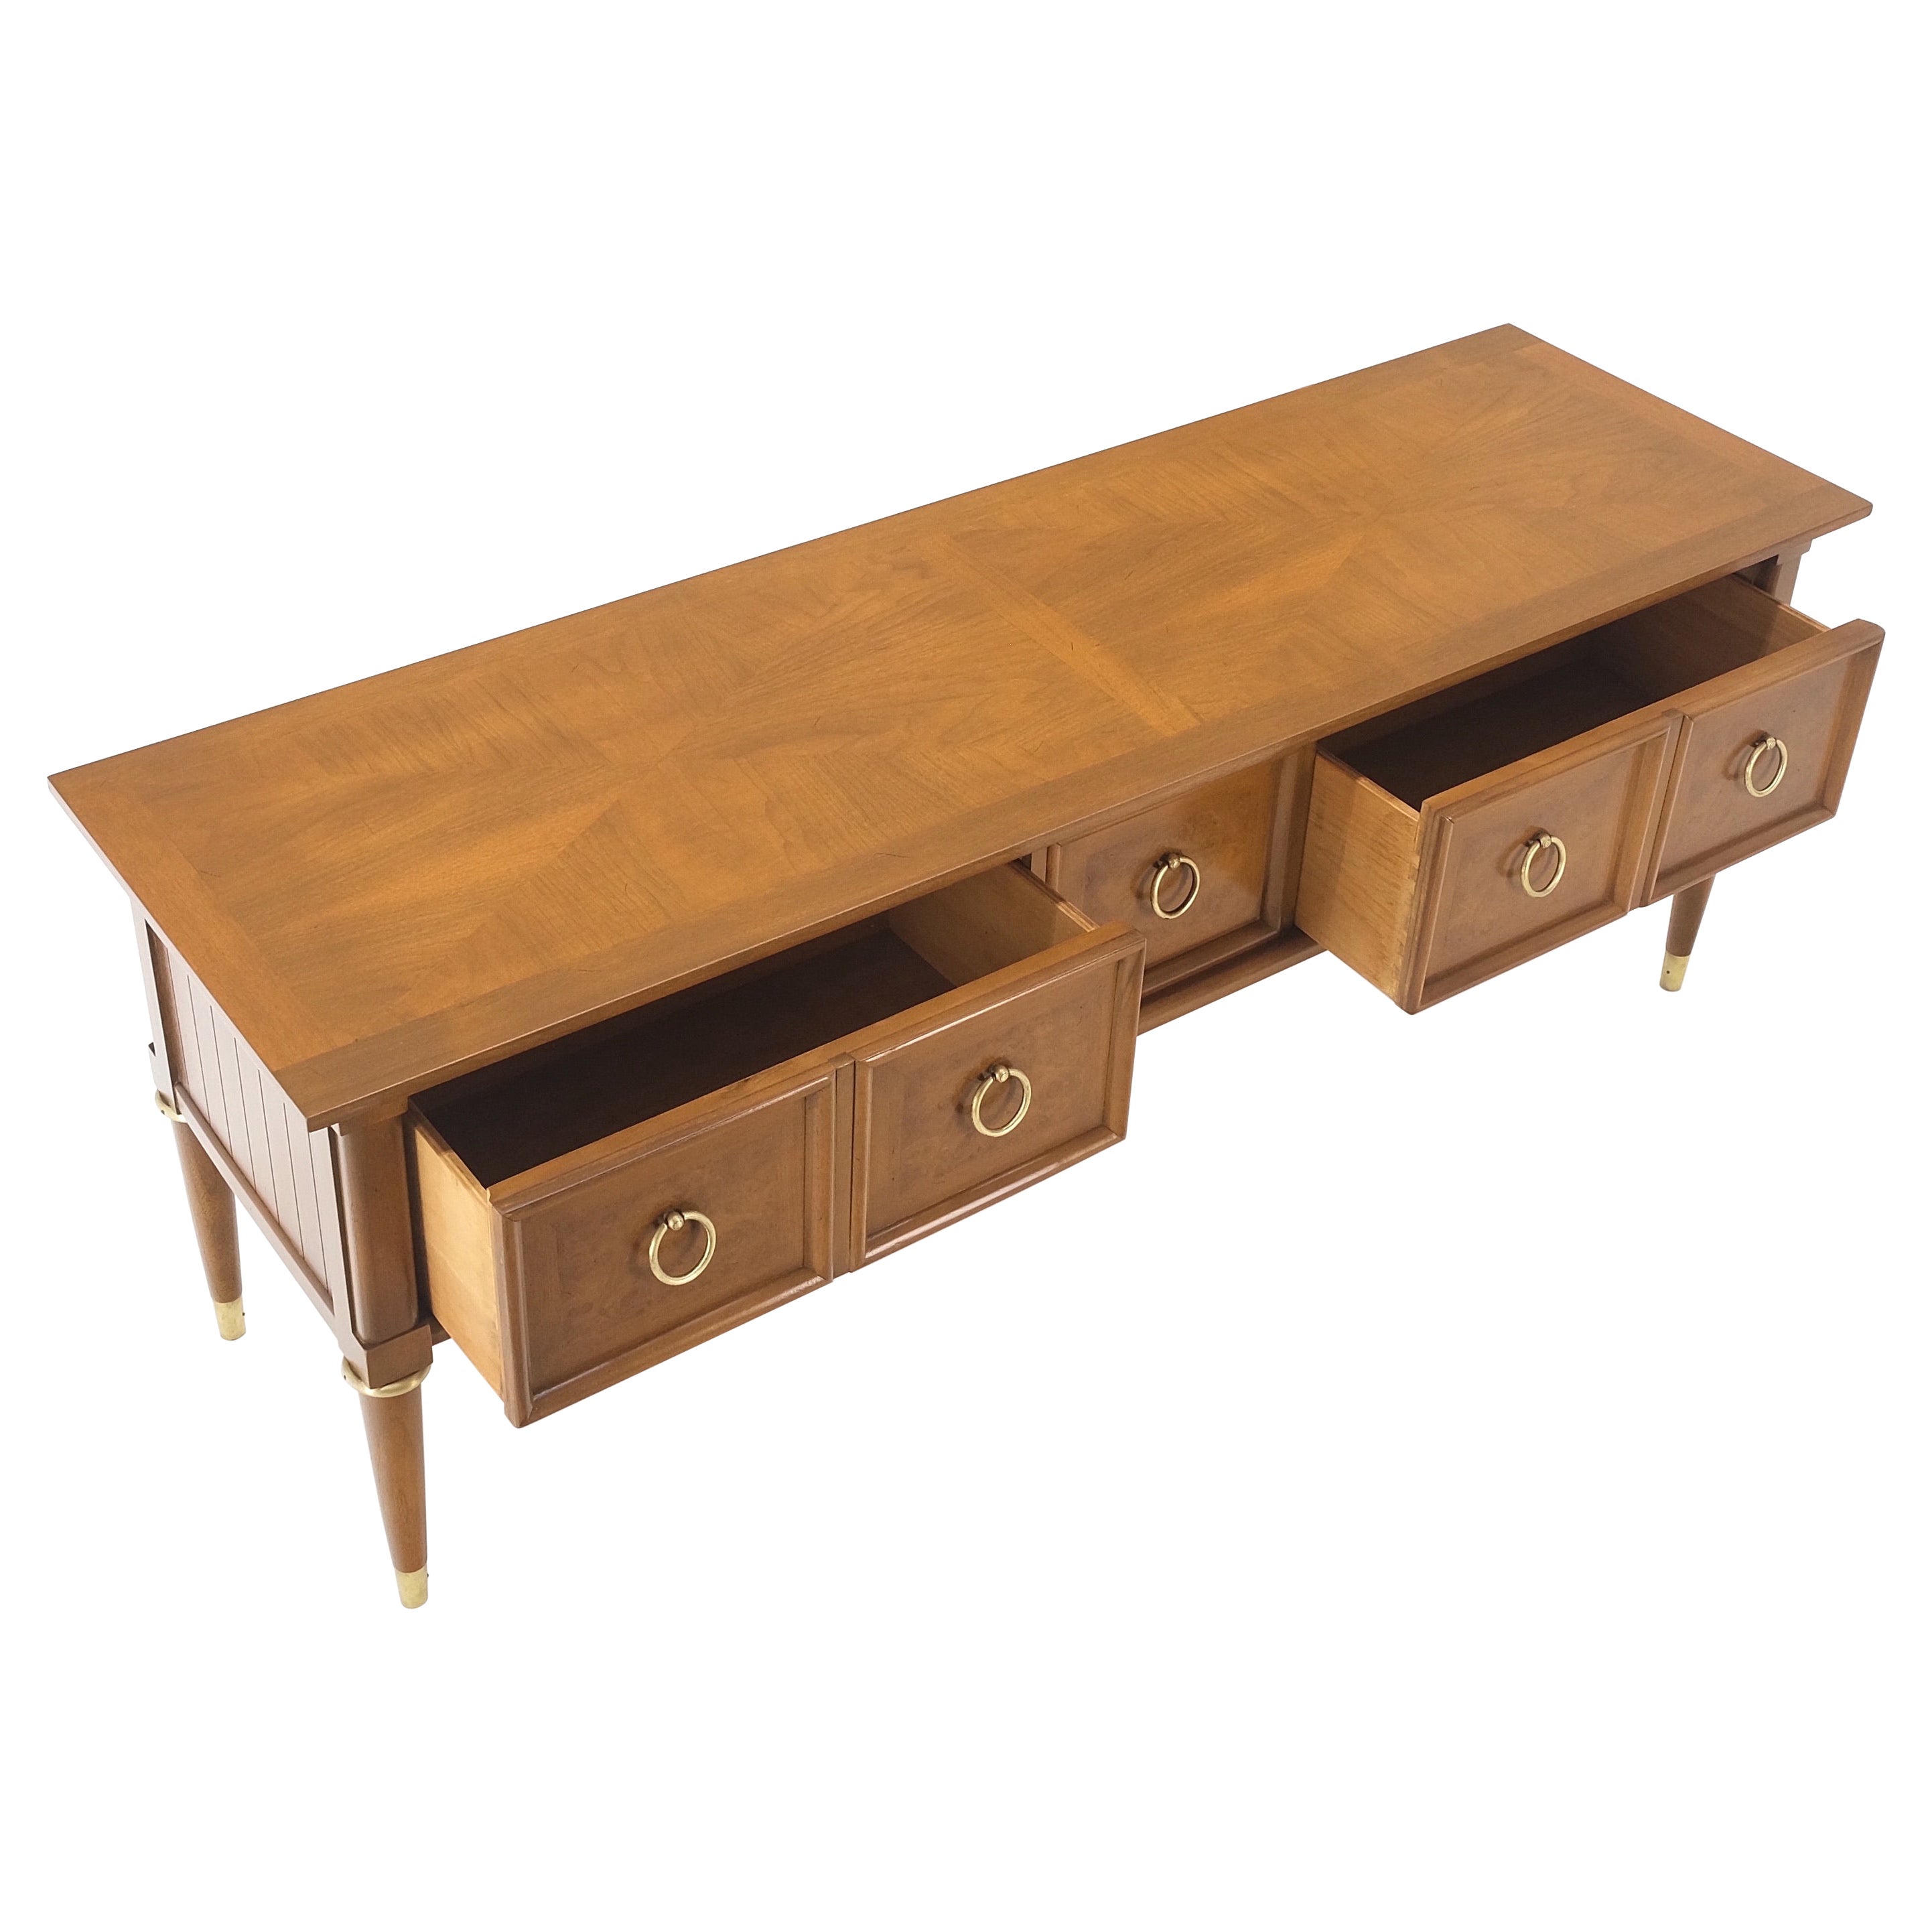 Brass Drop Rings Pulls Low Profile Tapered Legs Long Credenza Mid Century MINT! For Sale